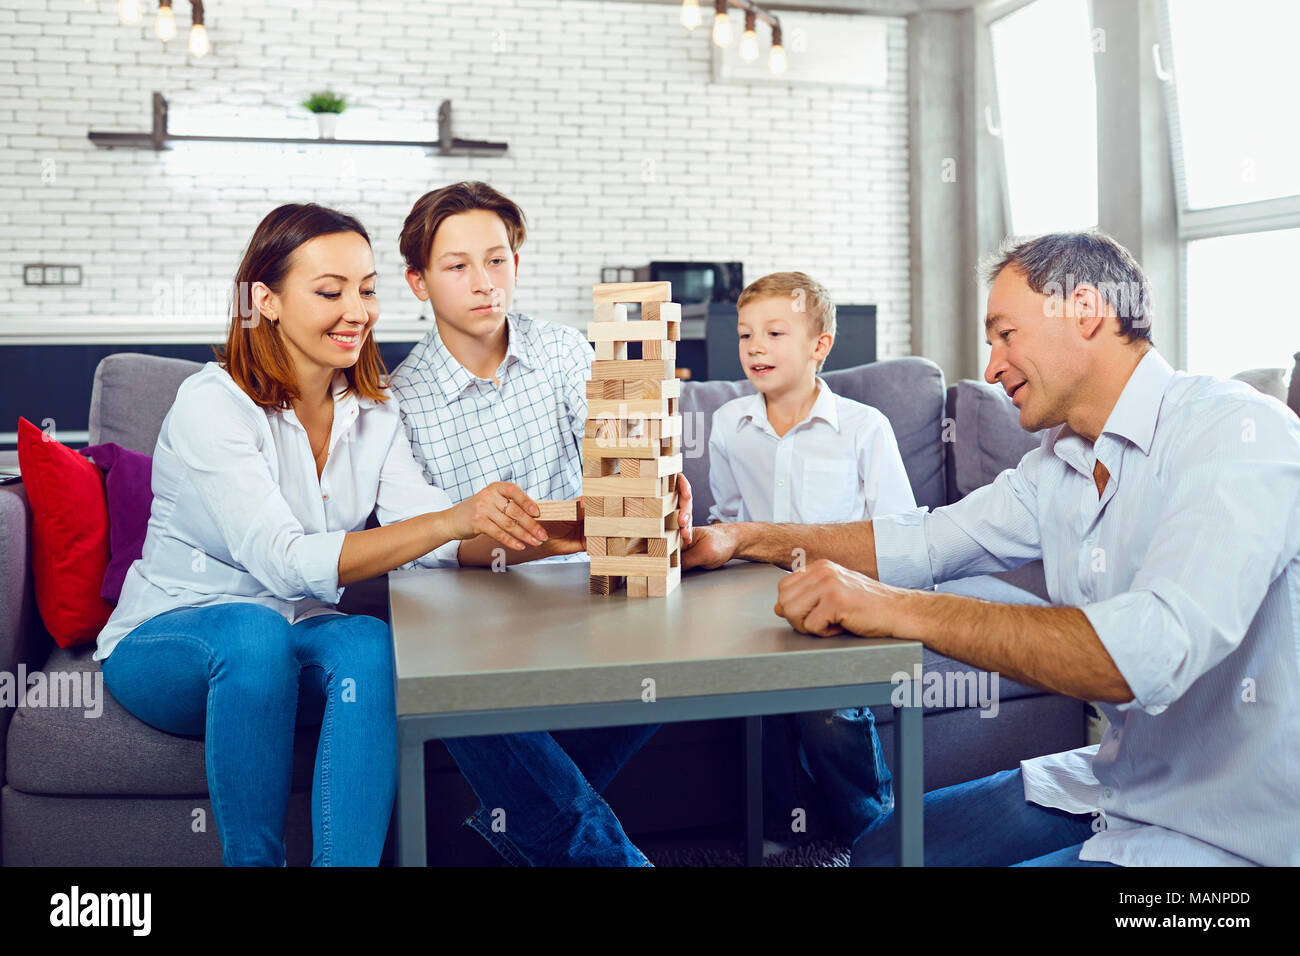 The family plays board games inside the room. Stock Photo